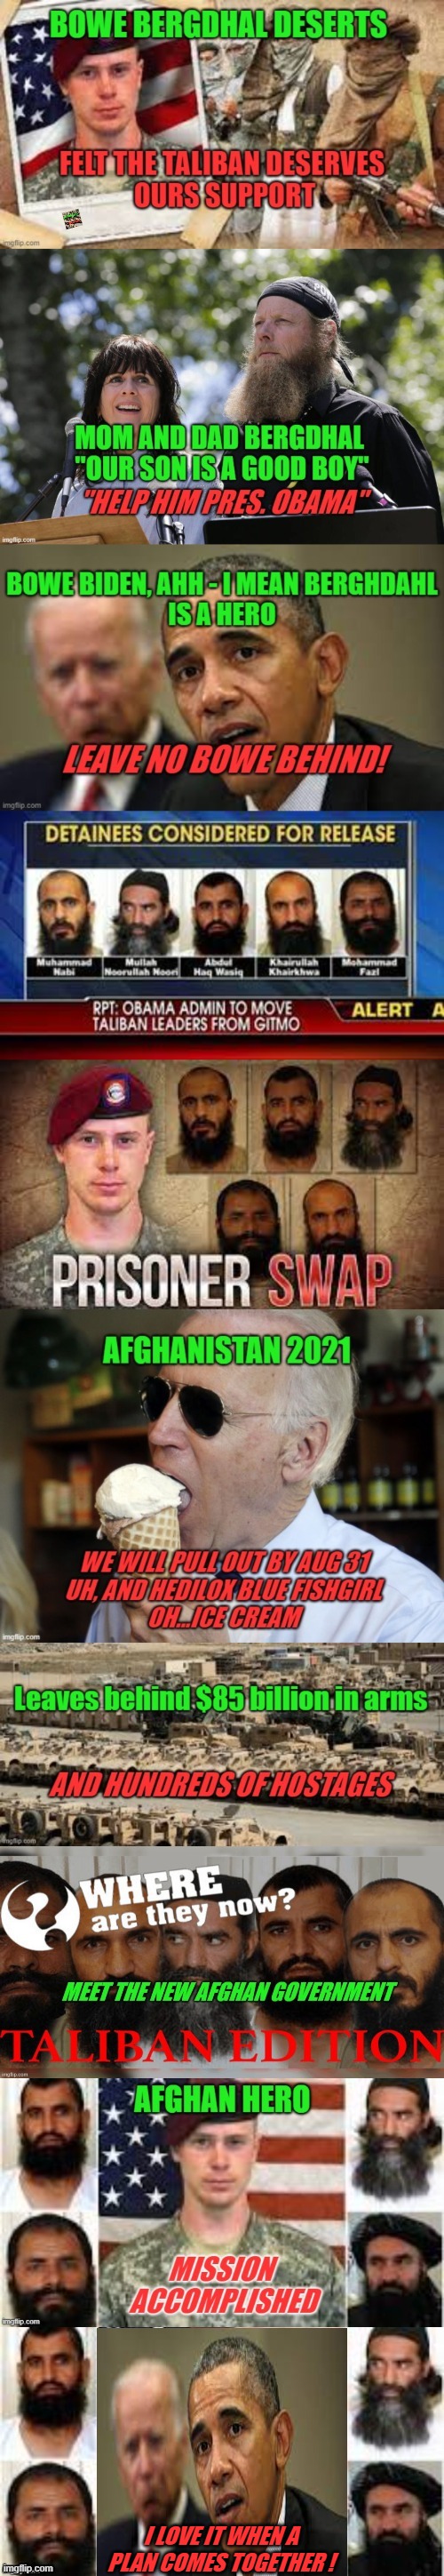 Obama, Afghanistan:I Love it When A Plan Comes Together | I LOVE IT WHEN A PLAN COMES TOGETHER ! | image tagged in afghanistan,biden,obama,politics,lies,deceit | made w/ Imgflip meme maker